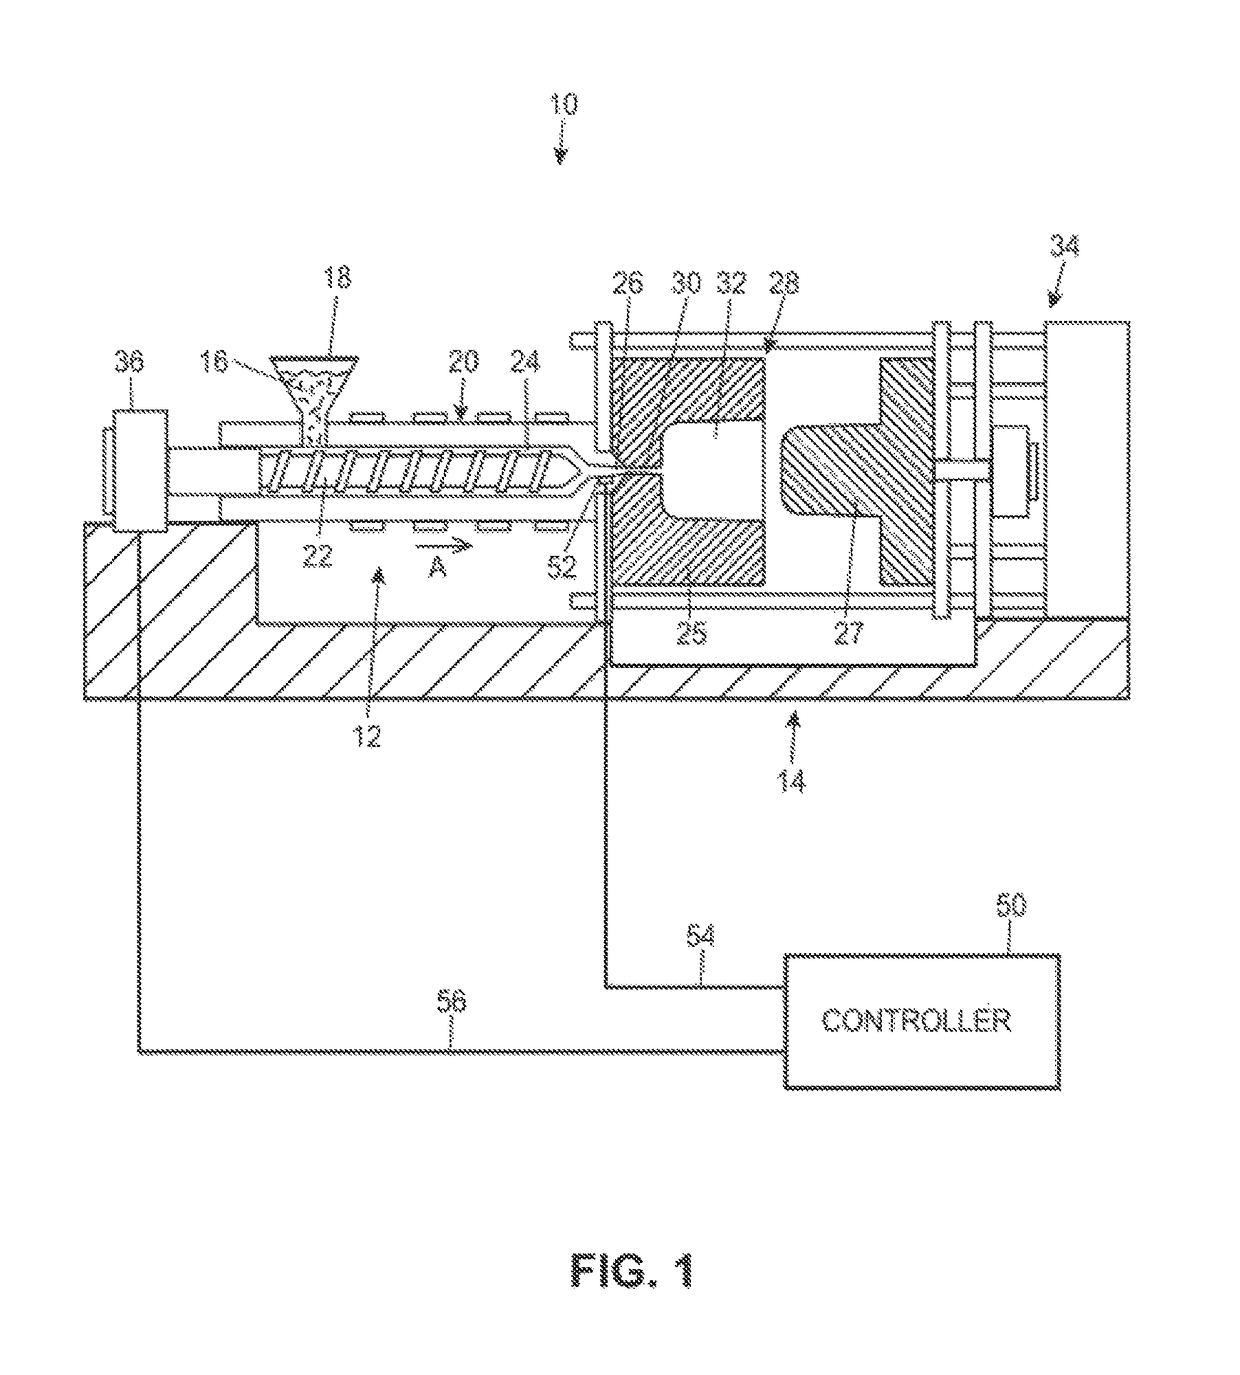 Co-injection with continuous injection molding